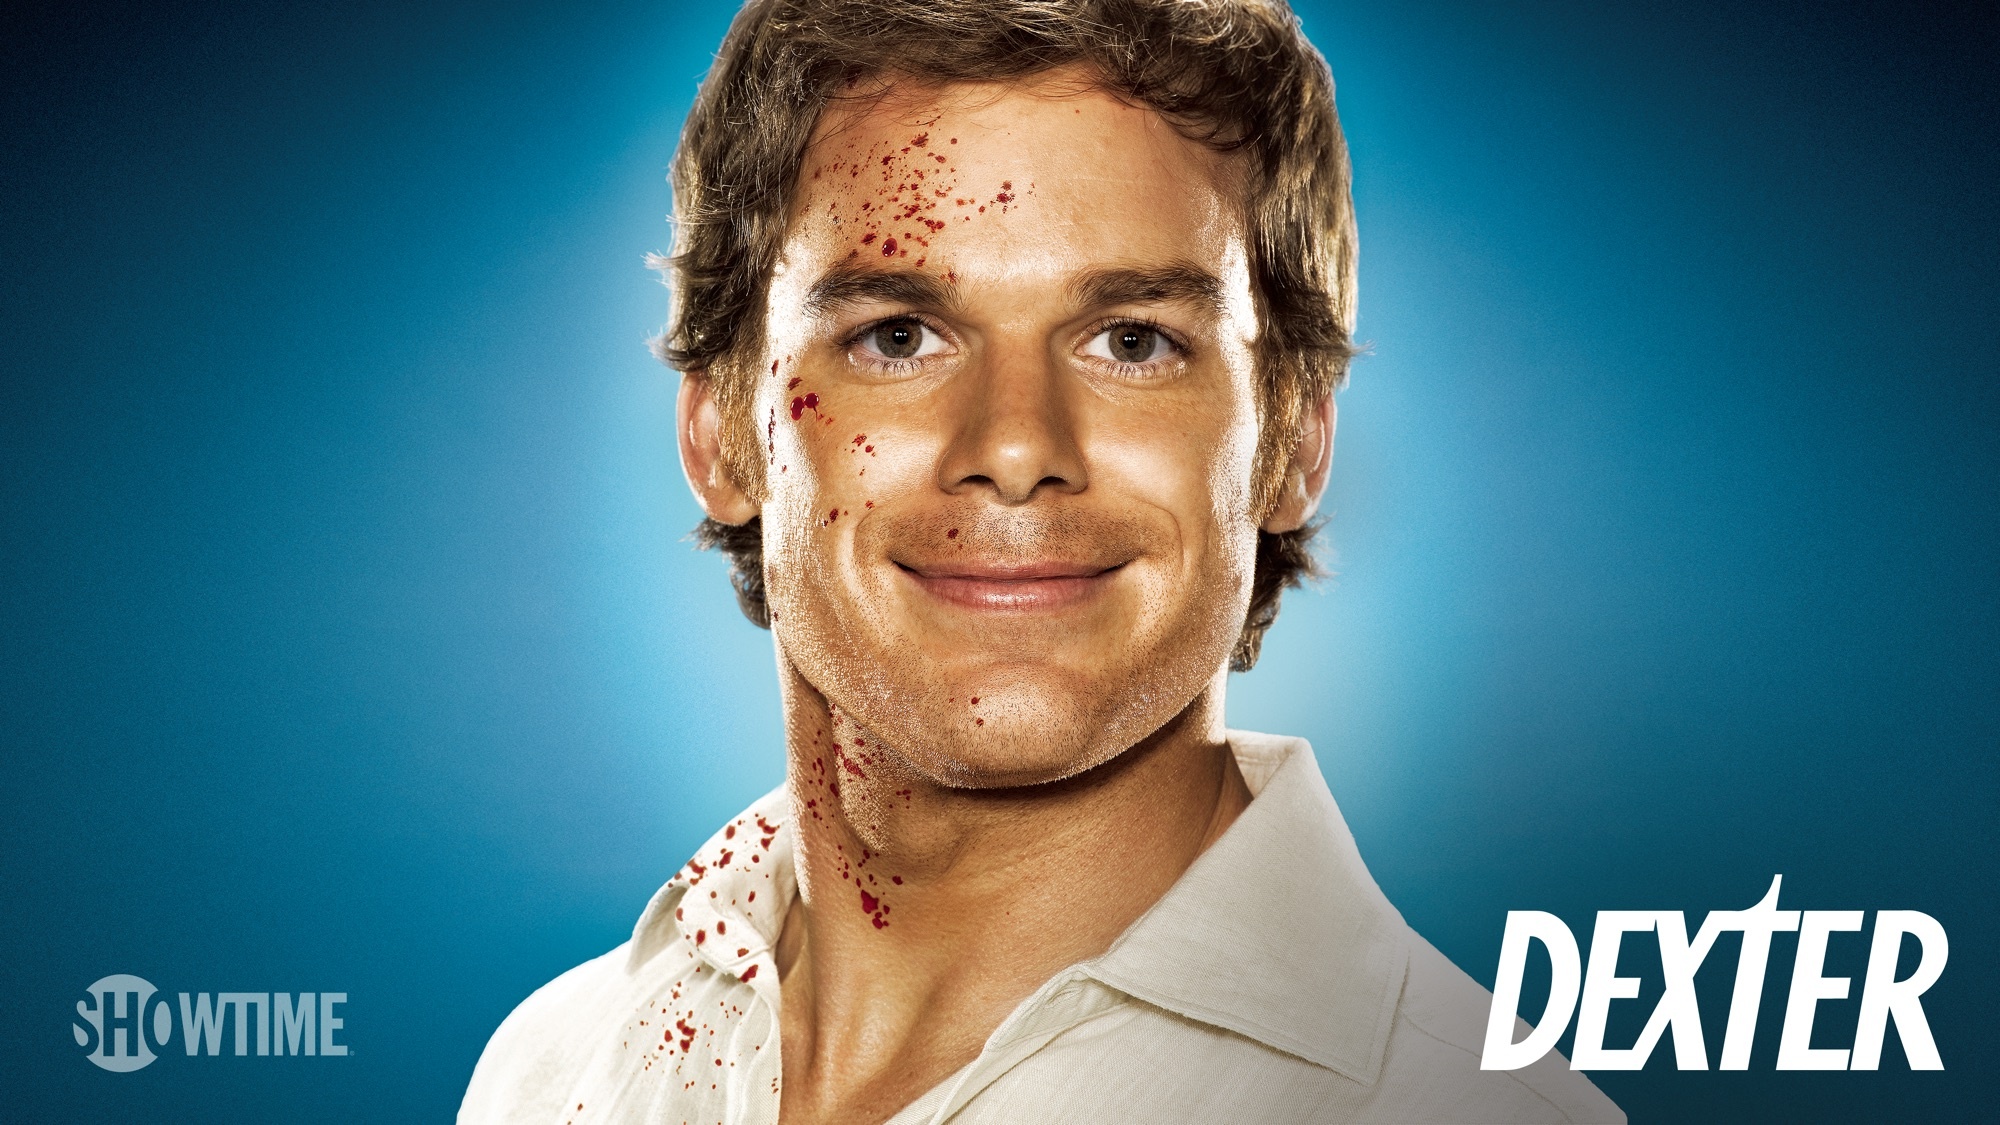 Michael C. Hall: Won the 2007 Television Critics Association award for Individual Achievement in Drama for Dexter. 2000x1130 HD Background.